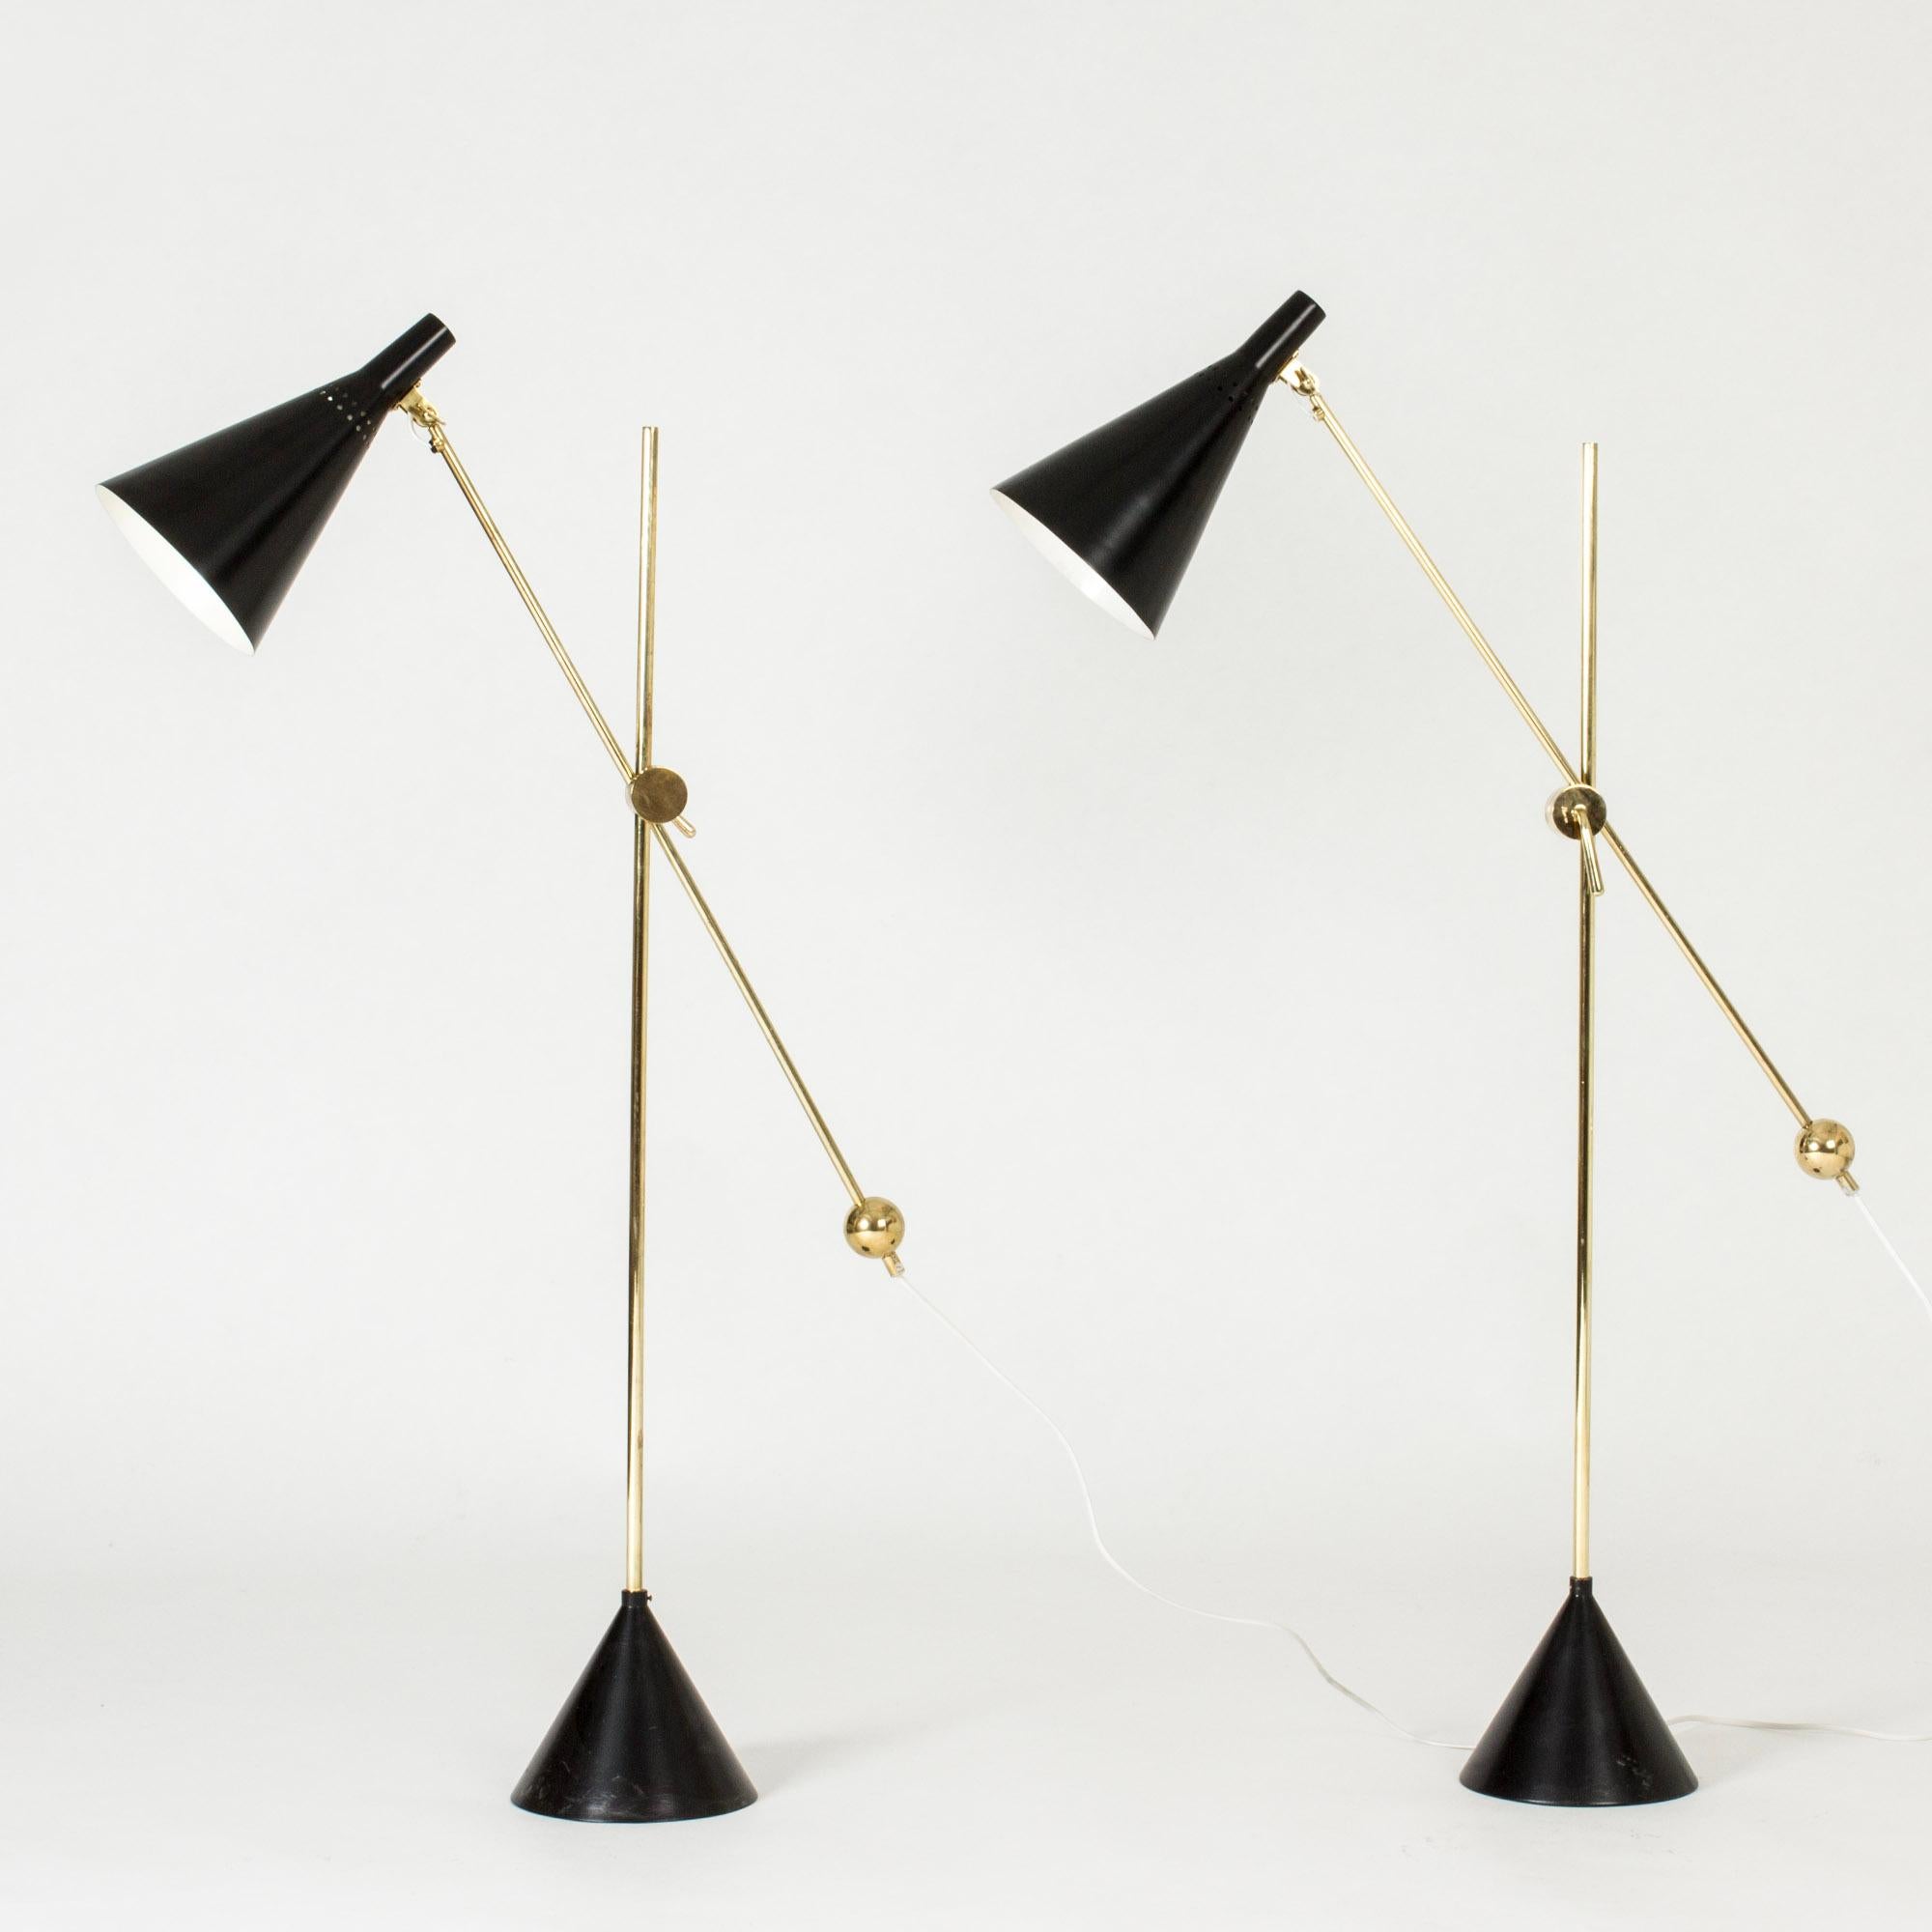 Amazing pair of floor lamps by Tapio Wirkkala, made from brass and black lacquered metal. Beautiful decorative brass details and clever mechanism for shifting the height and angle of the shades. Conical bases.